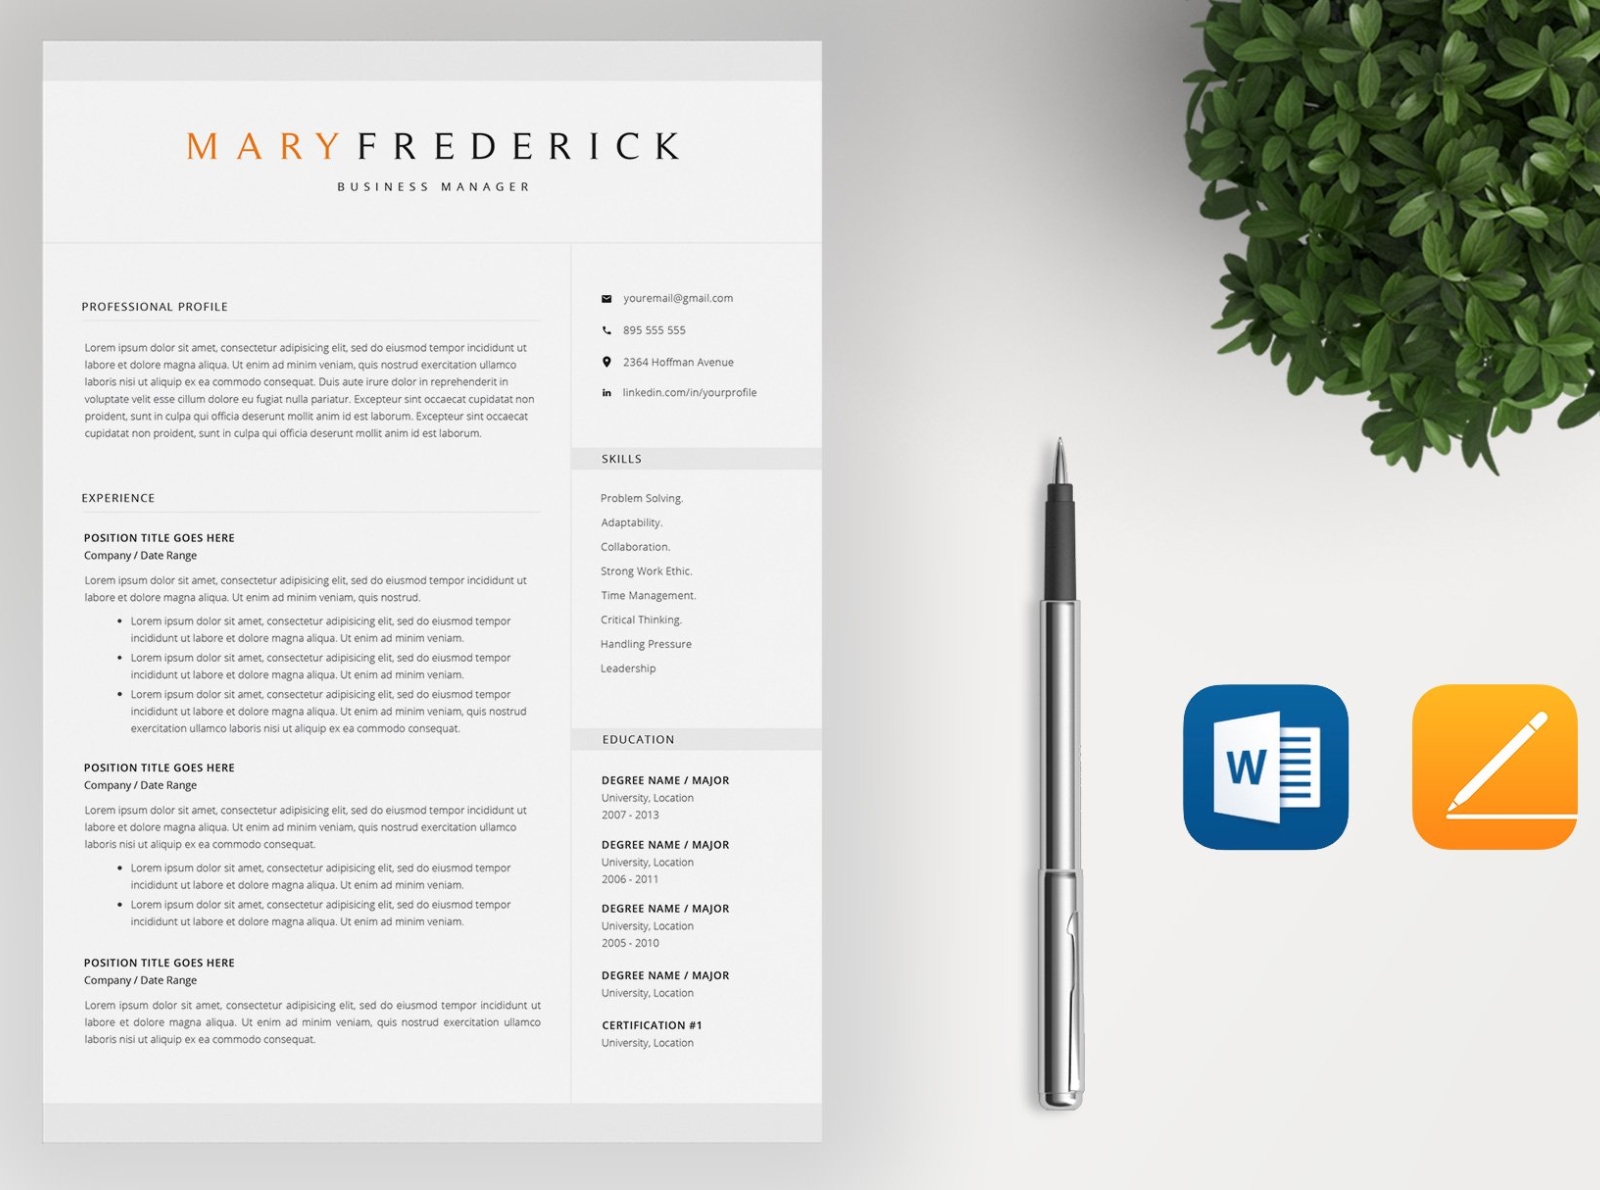 Curriculum Vitae Template Download from cdn.dribbble.com